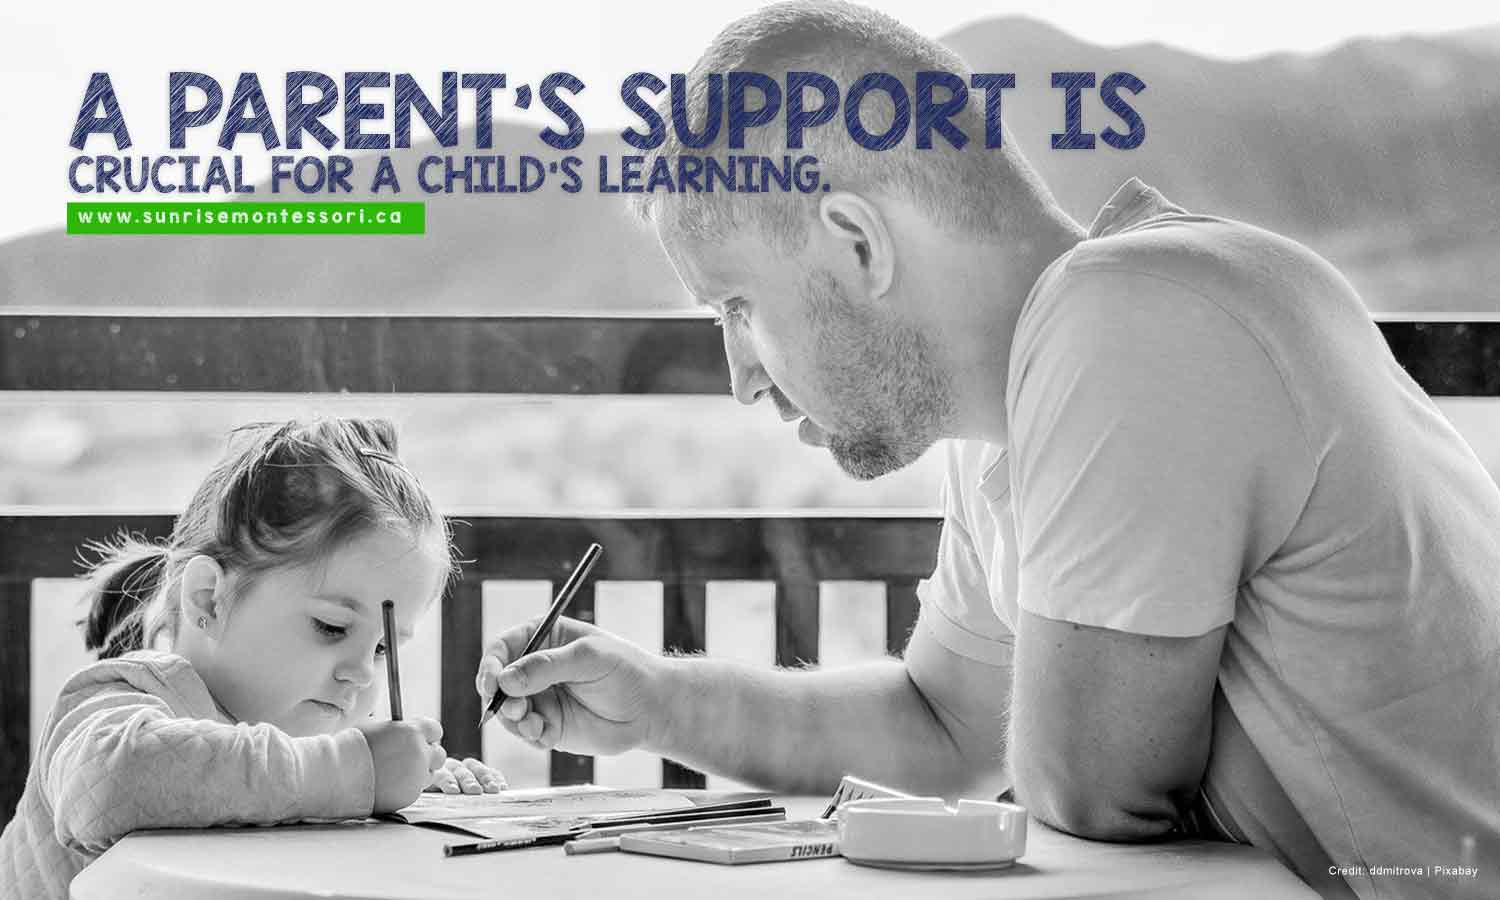 A parent’s support is crucial for a child’s learning.